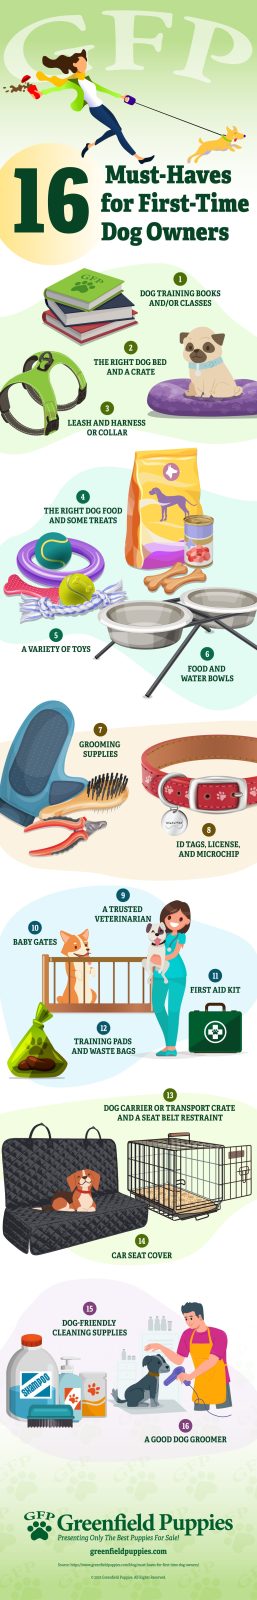 must-haves for first-time dog owners - infographic by Greenfield Puppies